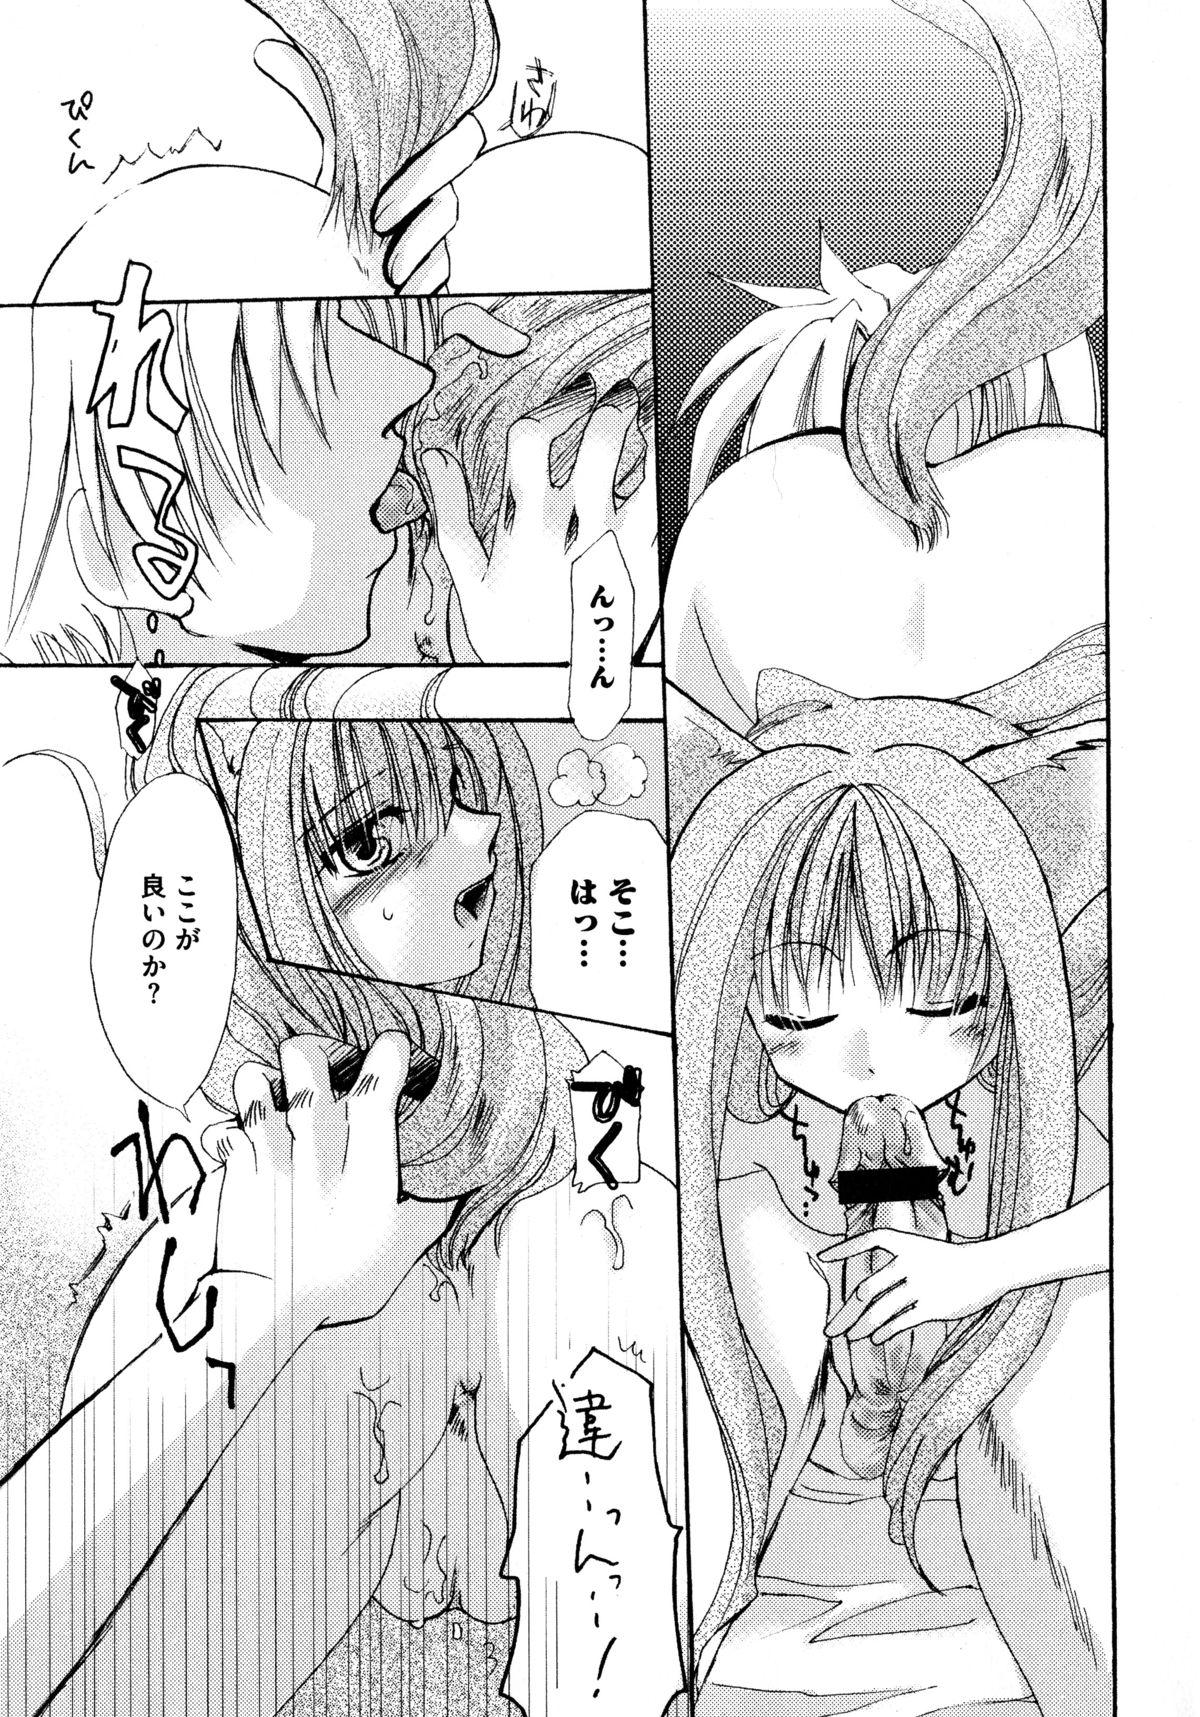 Round Ass Ookami Musume to Seikou Ookami Musume Eroparo Anthology - Spice and wolf Tites - Page 12